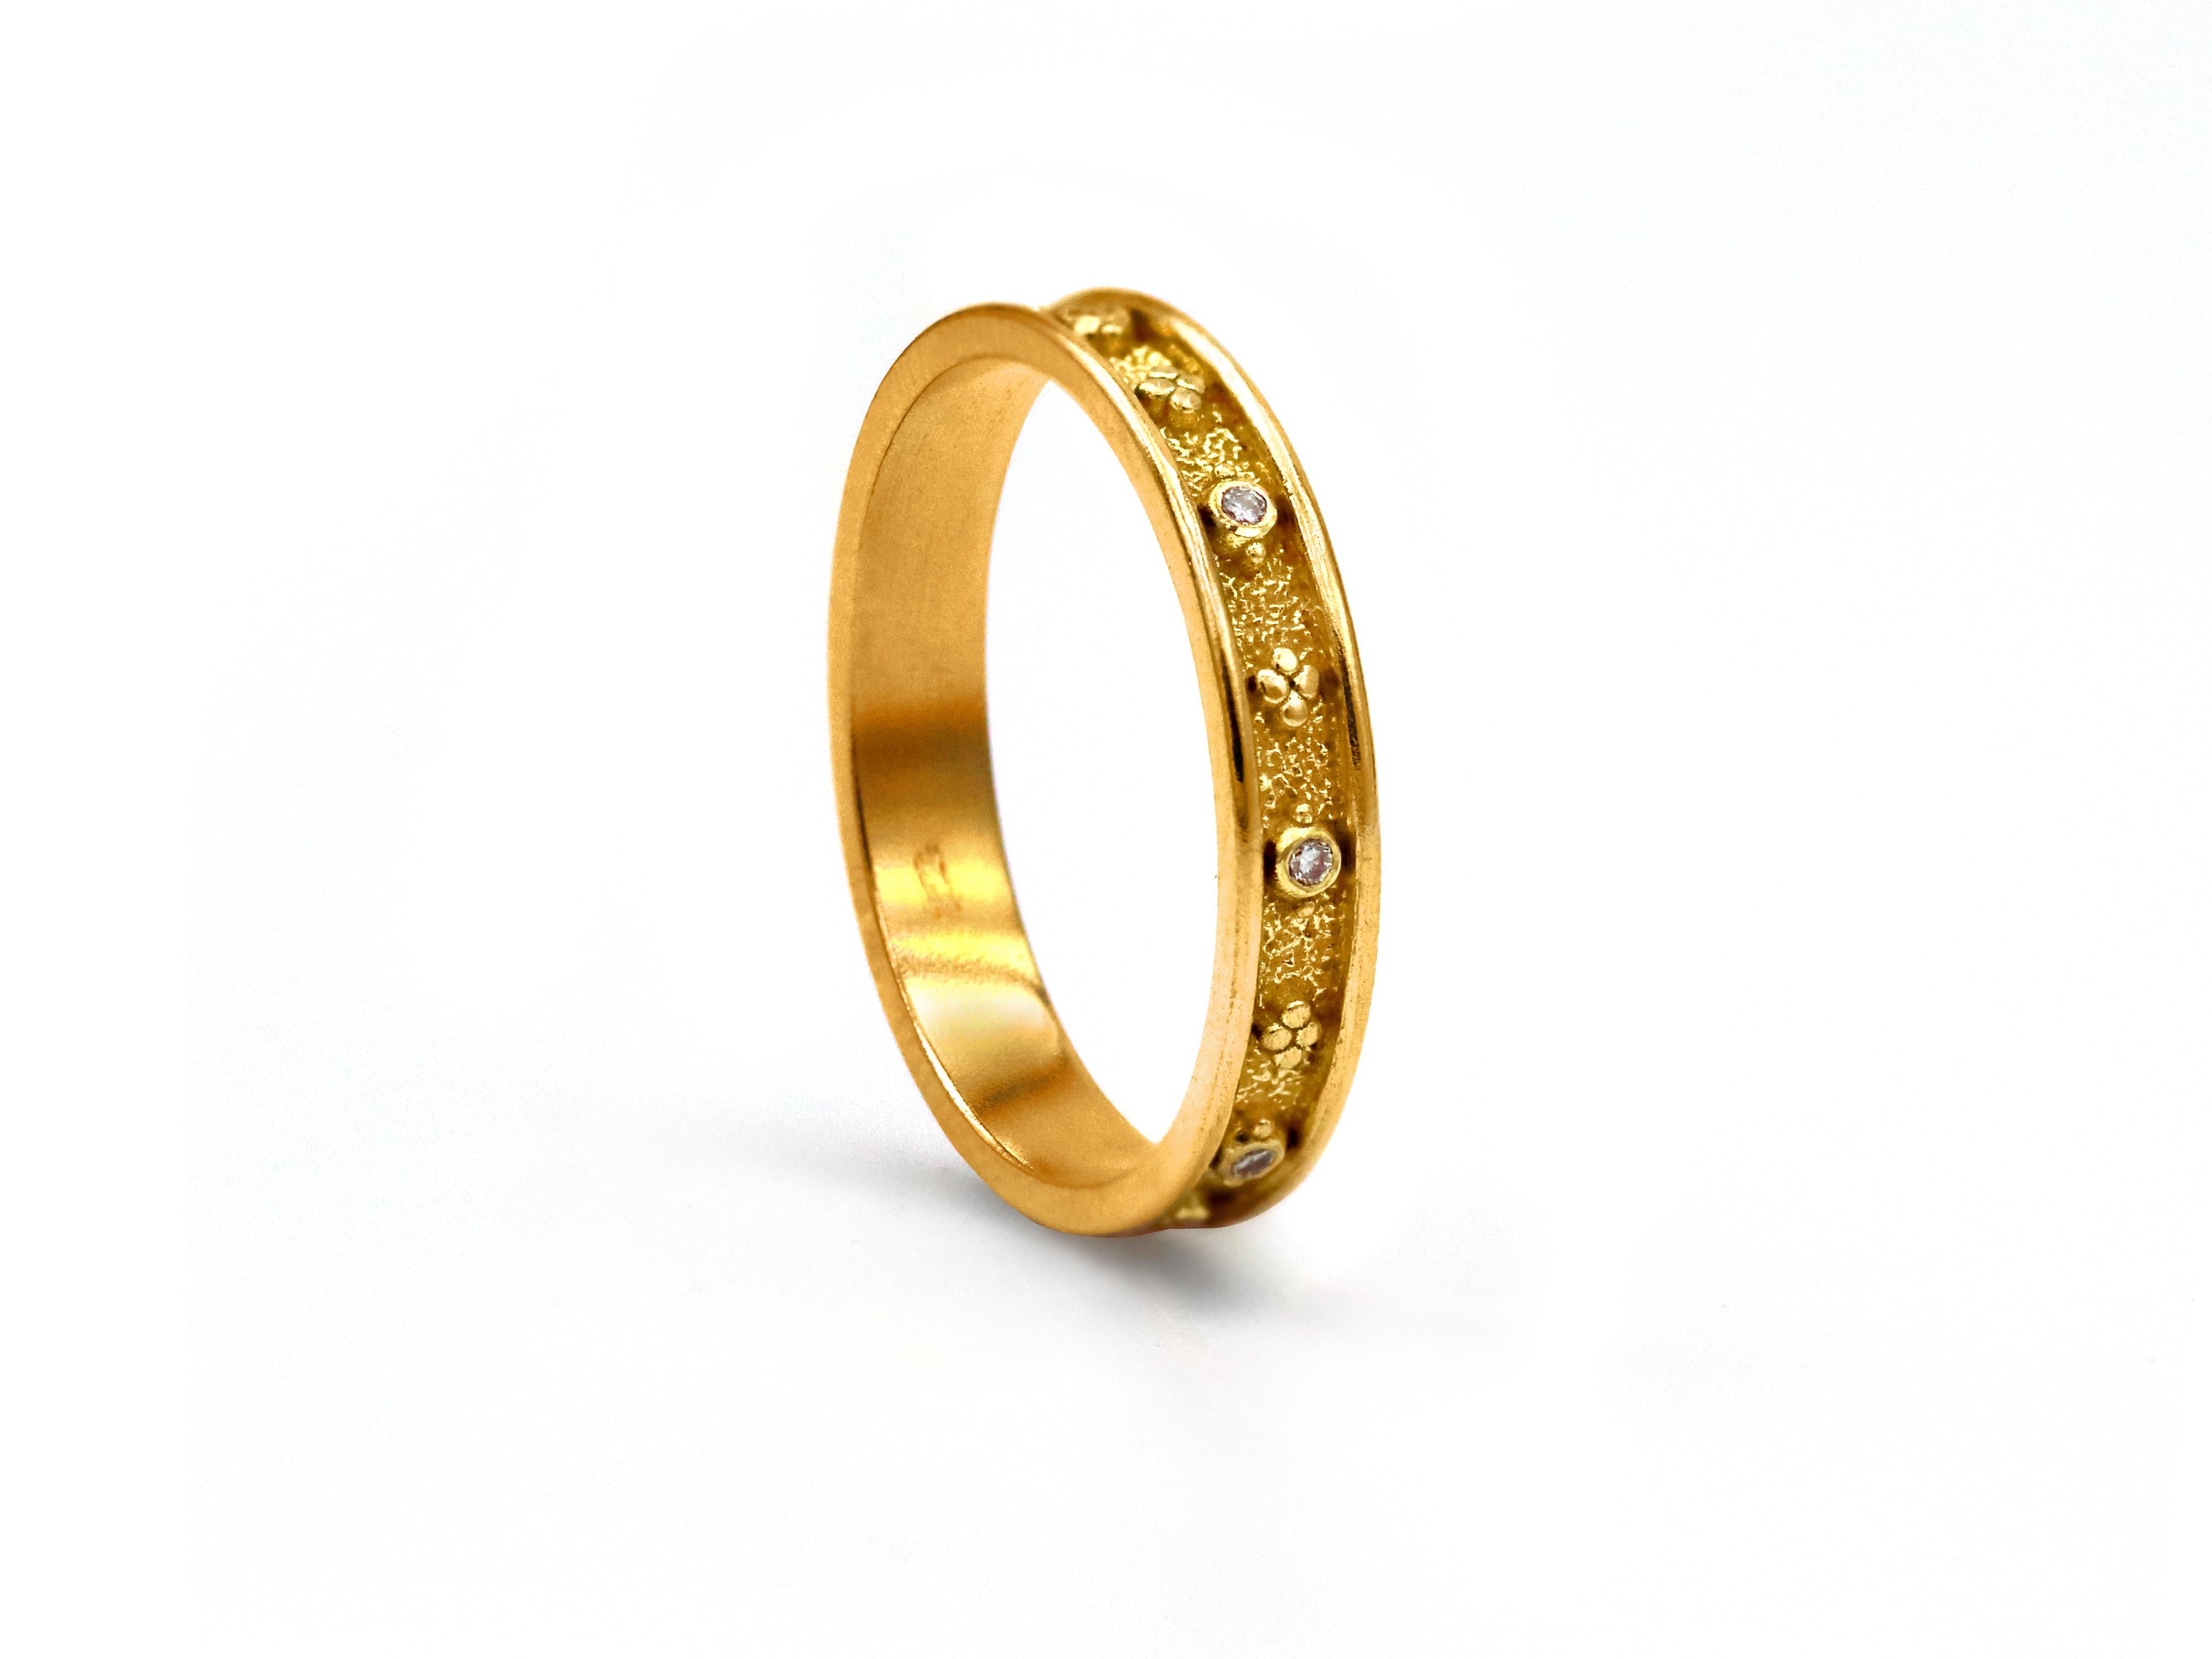 Neoclassical ring in the narrow band set in 18k yellow gold and decorated all the way around with natural brilliant cut diamonds. It’s a simple and elegant ring that can frame any other.

It can also be ordered in White or Rose Gold and with the